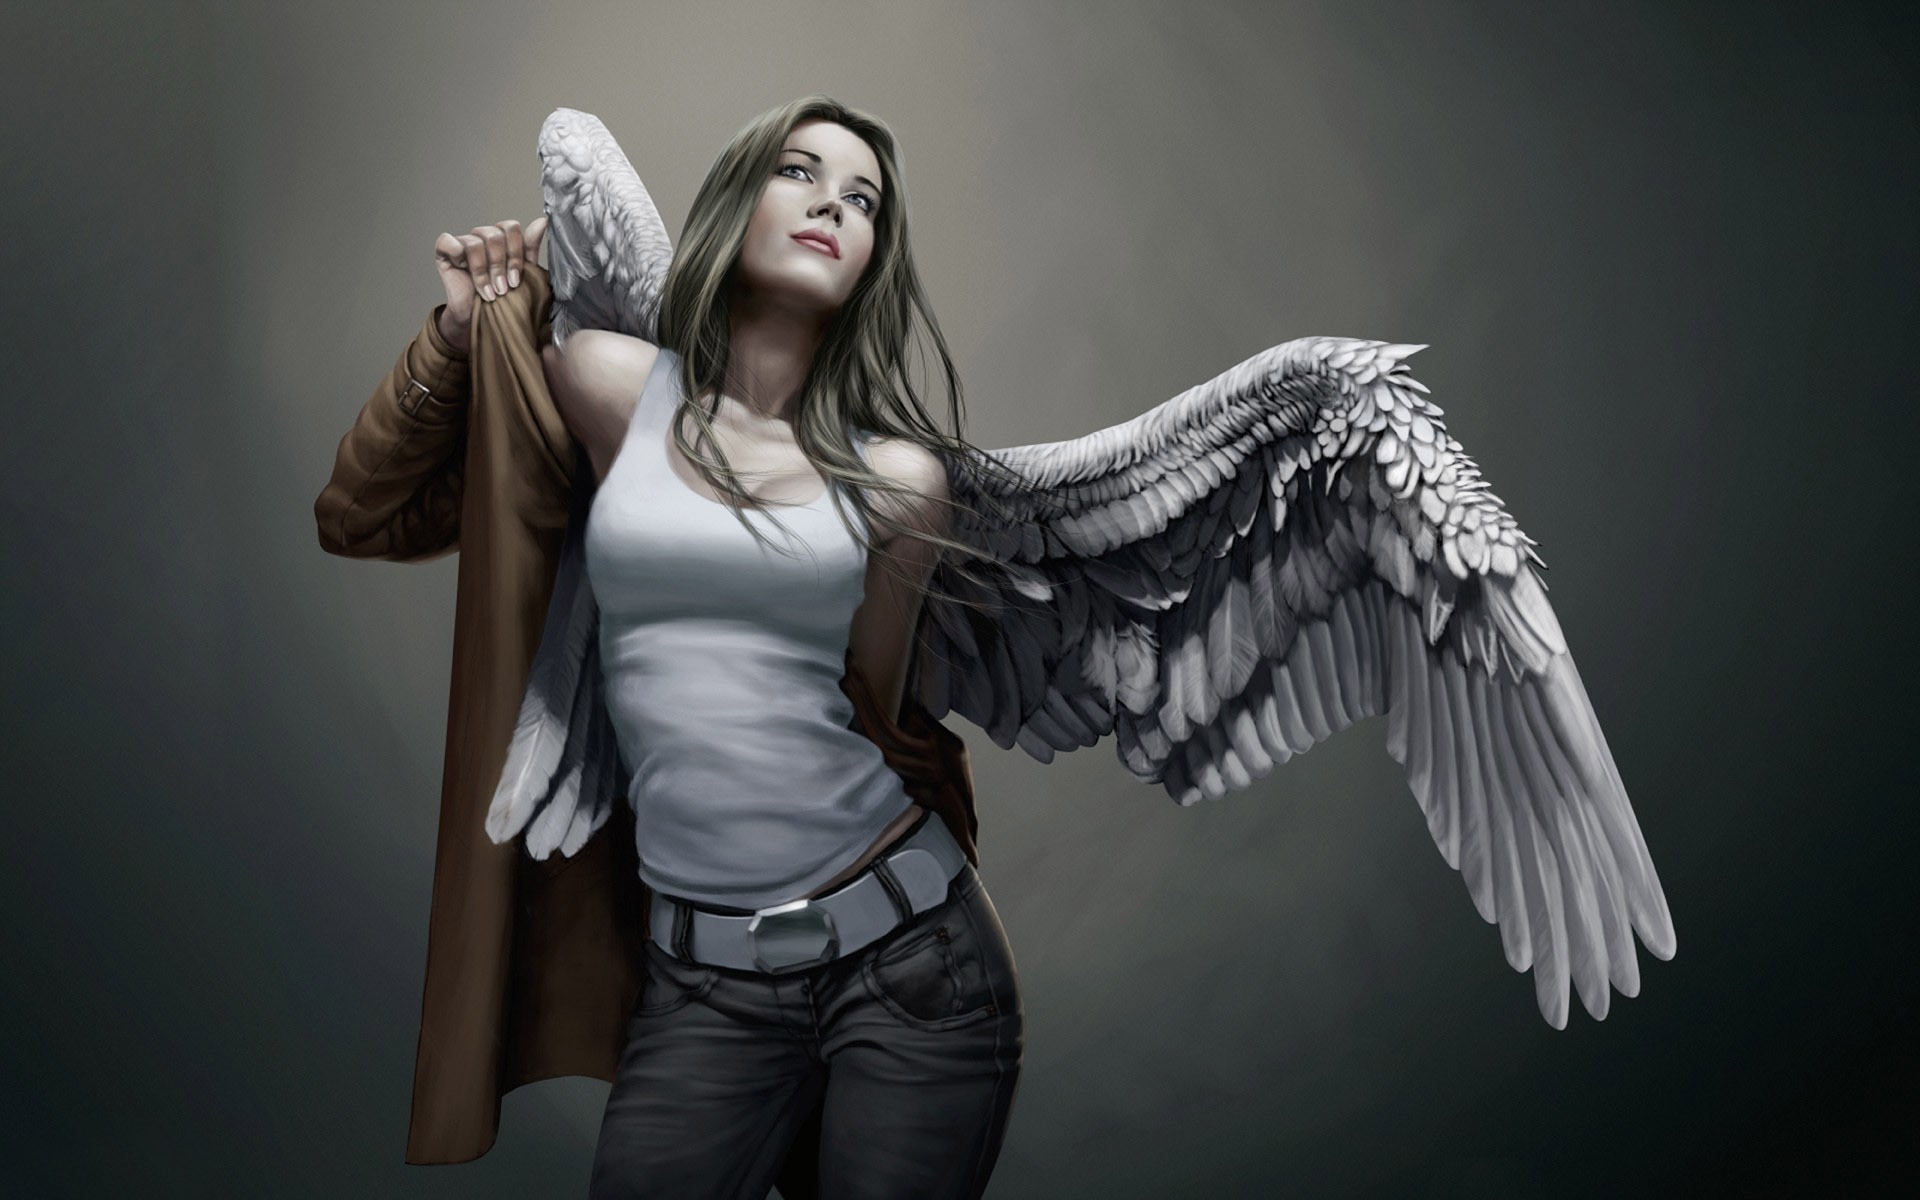 Angel, 3D, Photomanipulation, Photoshop Full HD wallpaper download to PC, Mobile or Table PC. You can also set as Facebook Cover